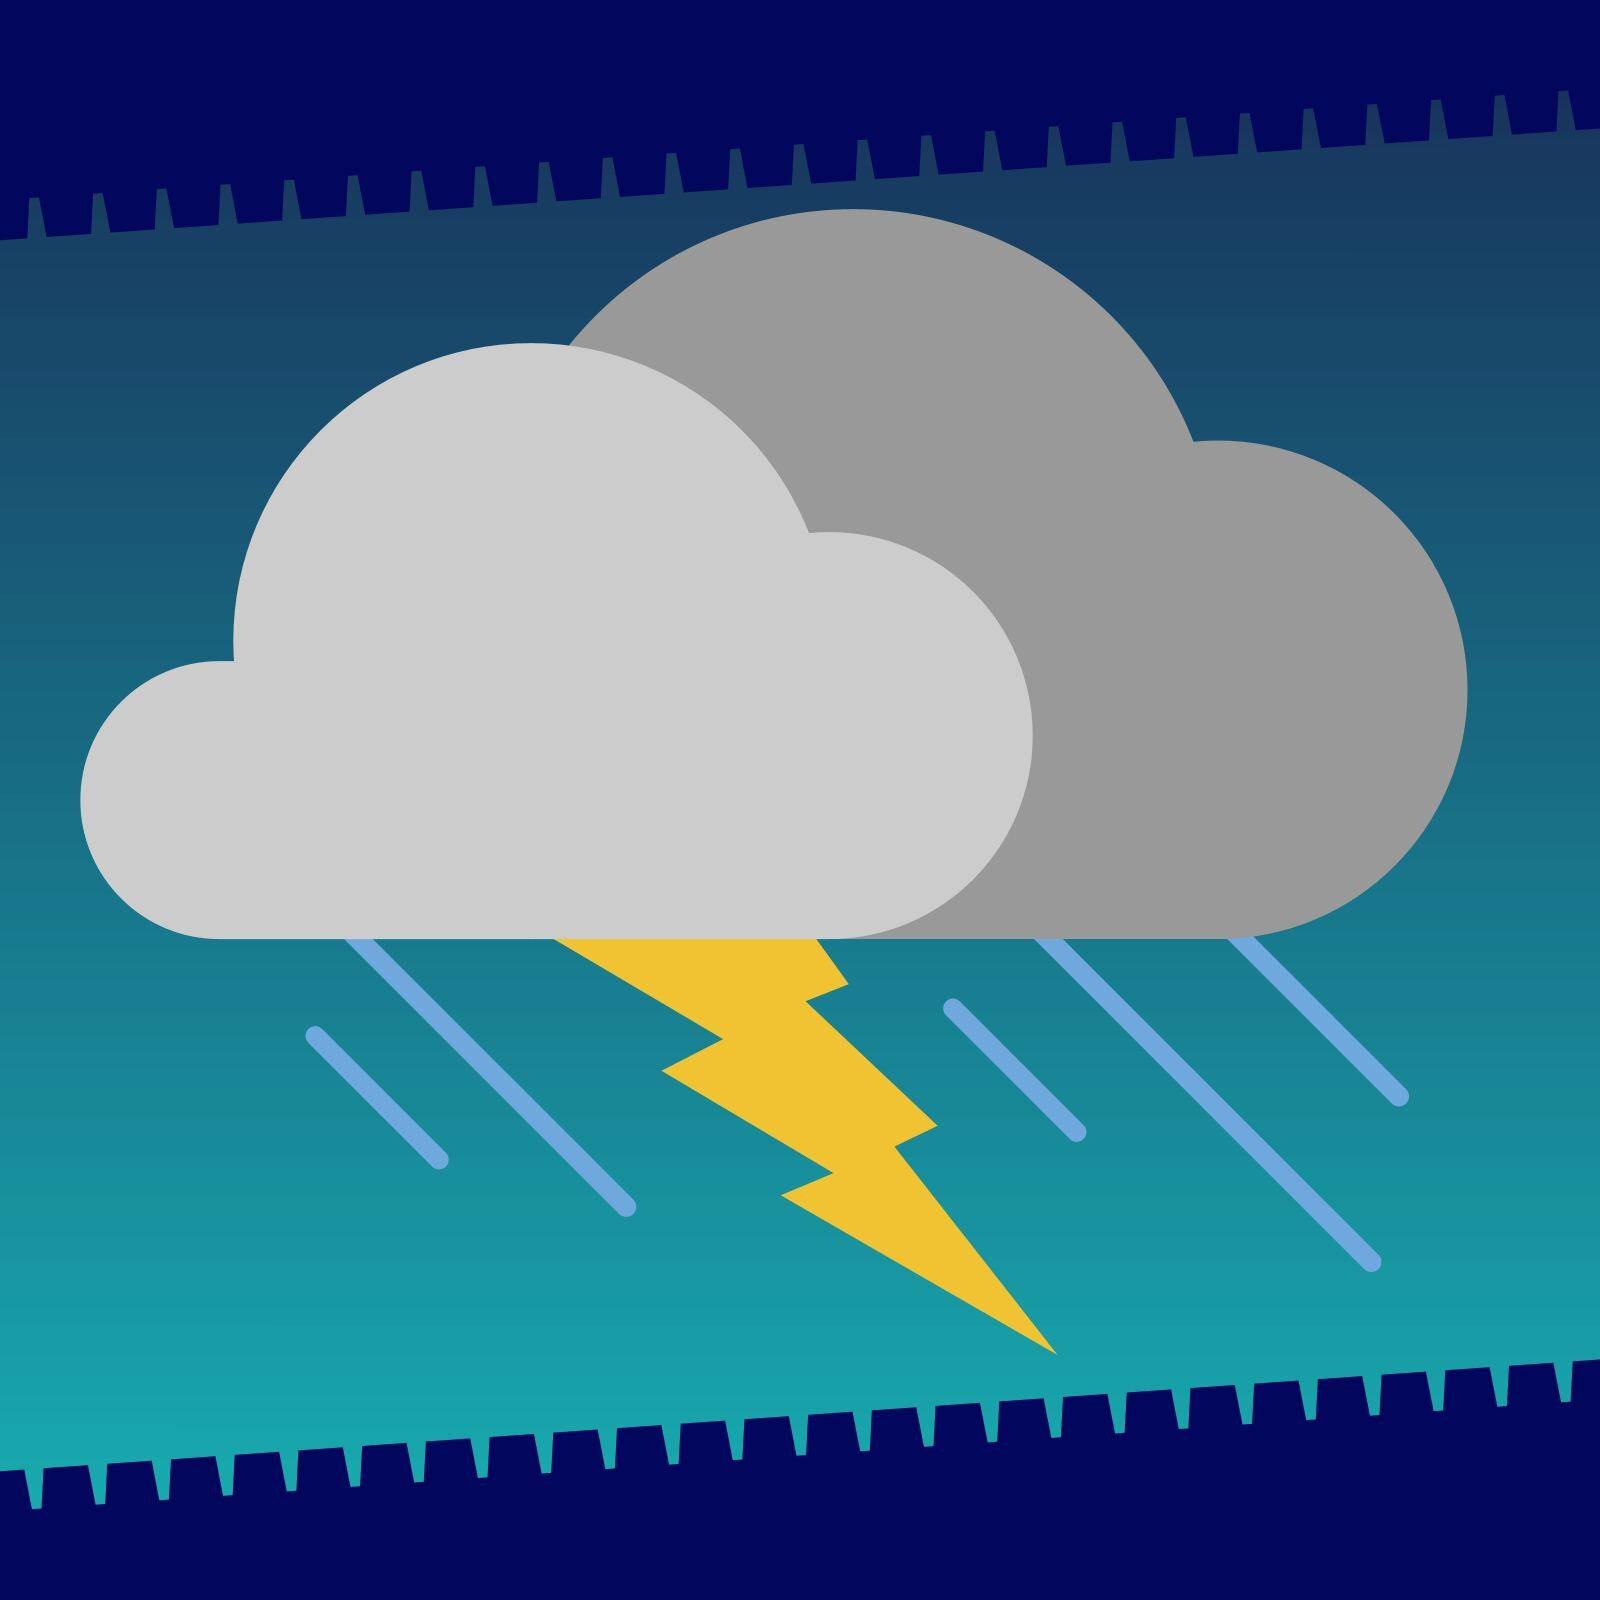 Spark excitement withthis digital art challenge! The Thunderstorm Zipper invites learners to recreate a storm cloud, complete with rain and a lightning bolt.

Yes, there is indeed a lightning bolt in Shapes menu in Google Slides and Google Drawings!
